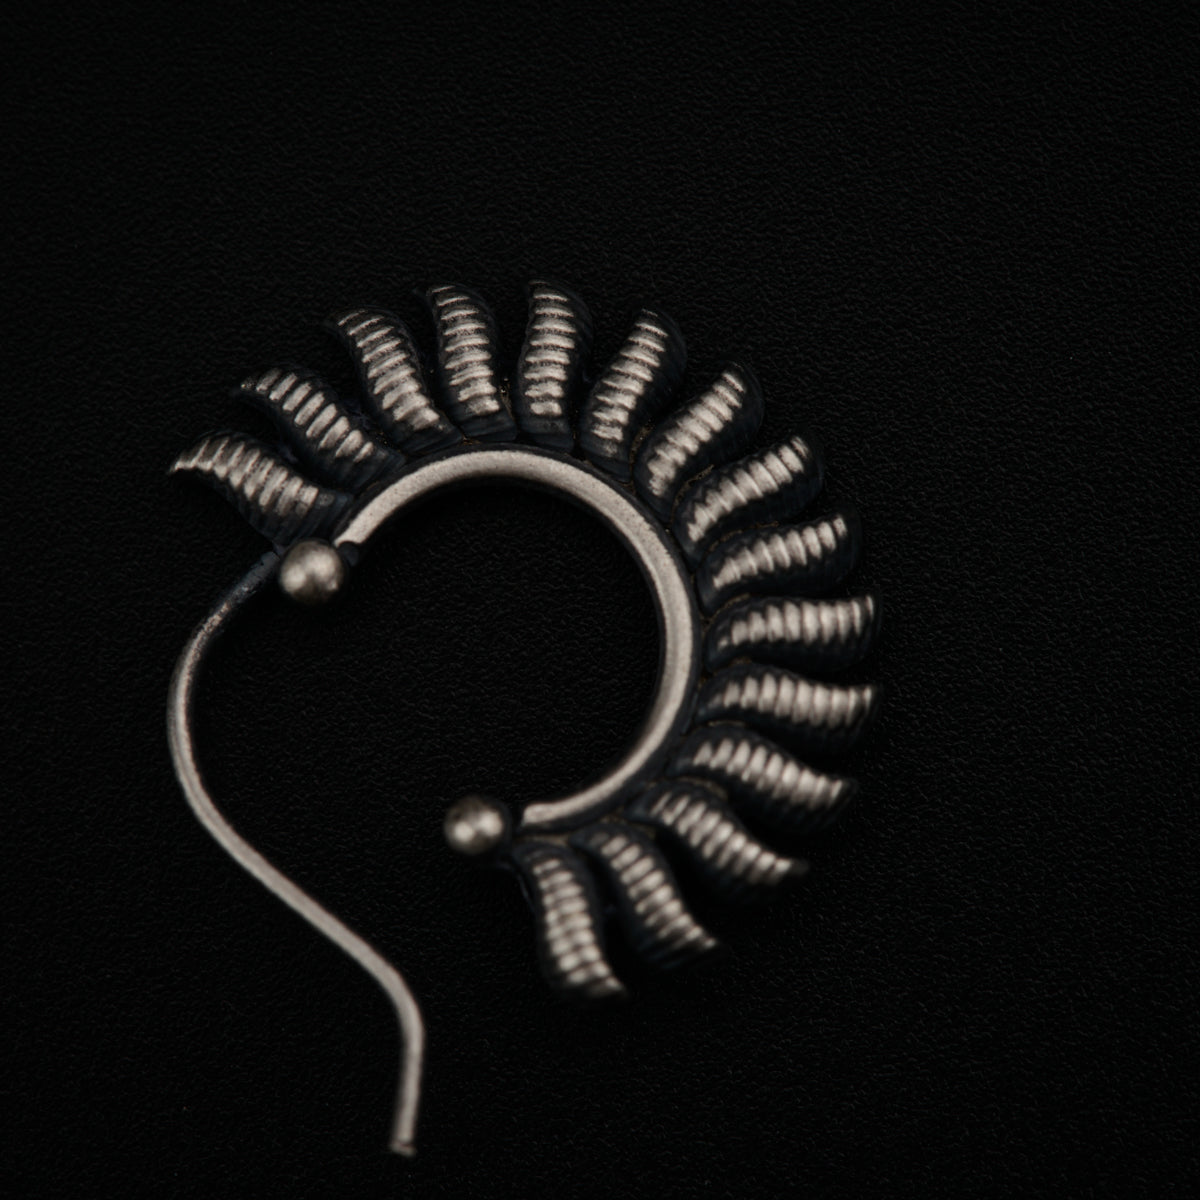 a pair of metal ear buds on a black surface